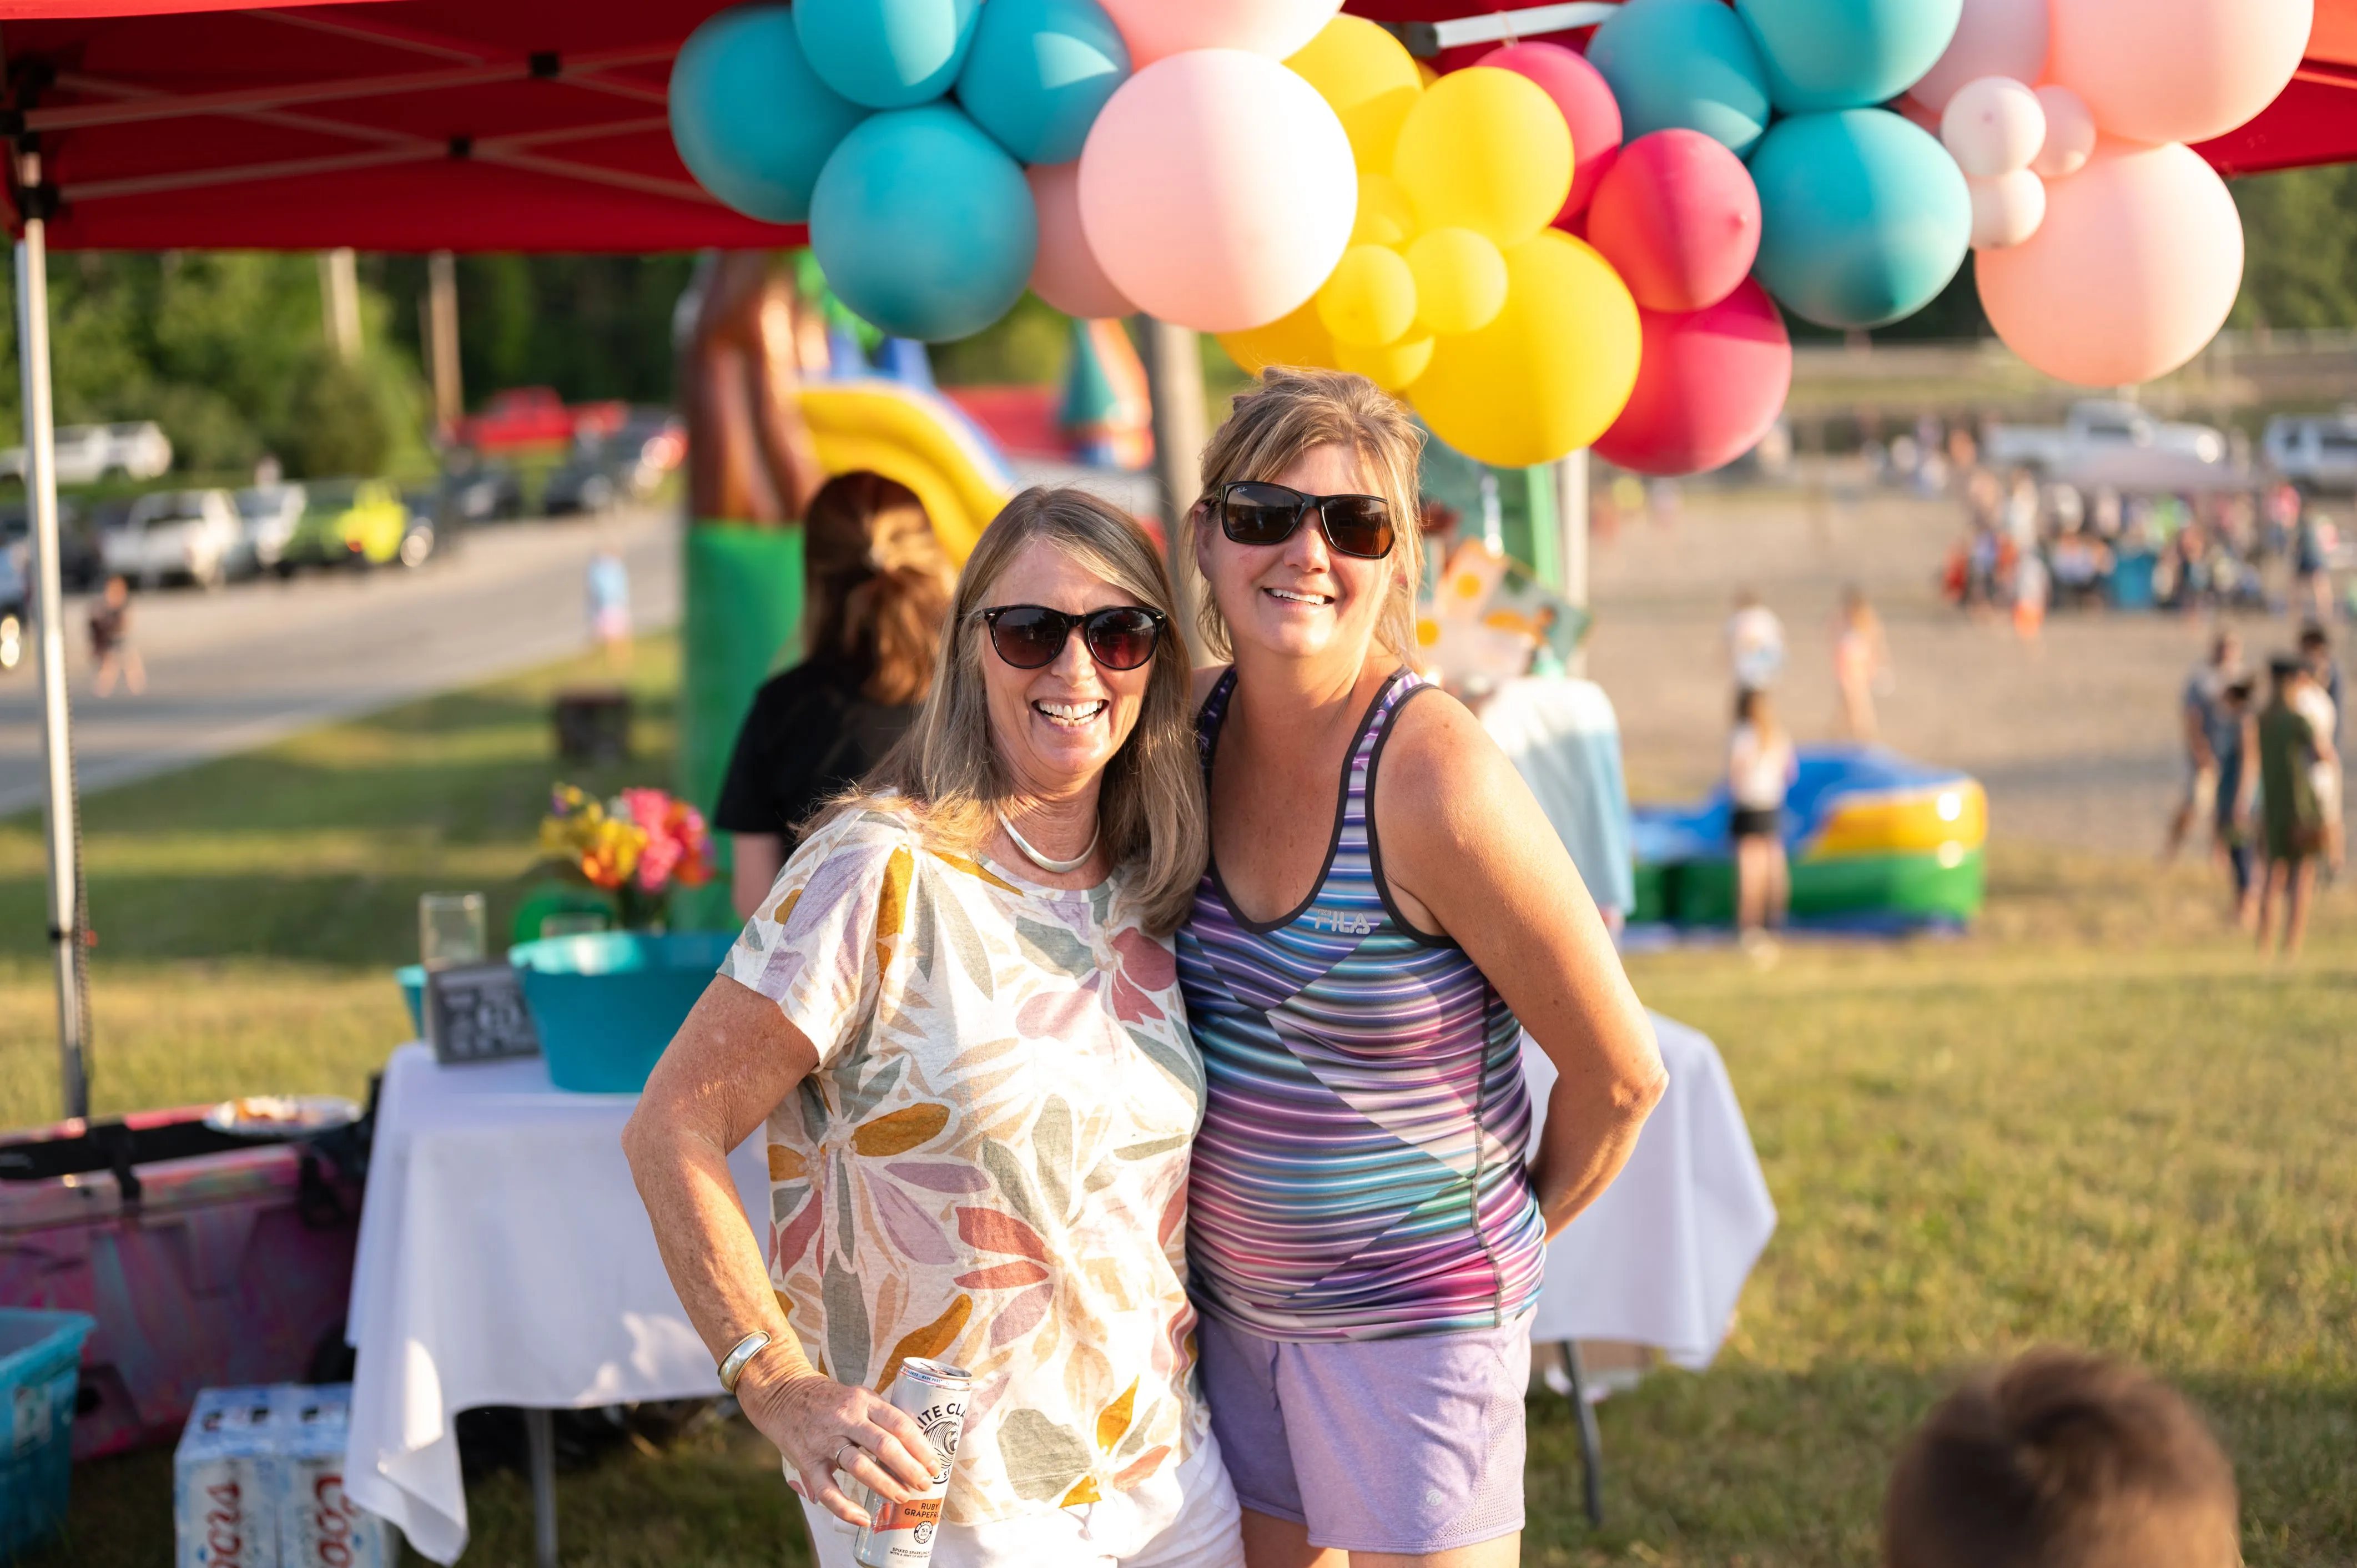 Two women smiling at an outdoor event with colorful balloons in the background.